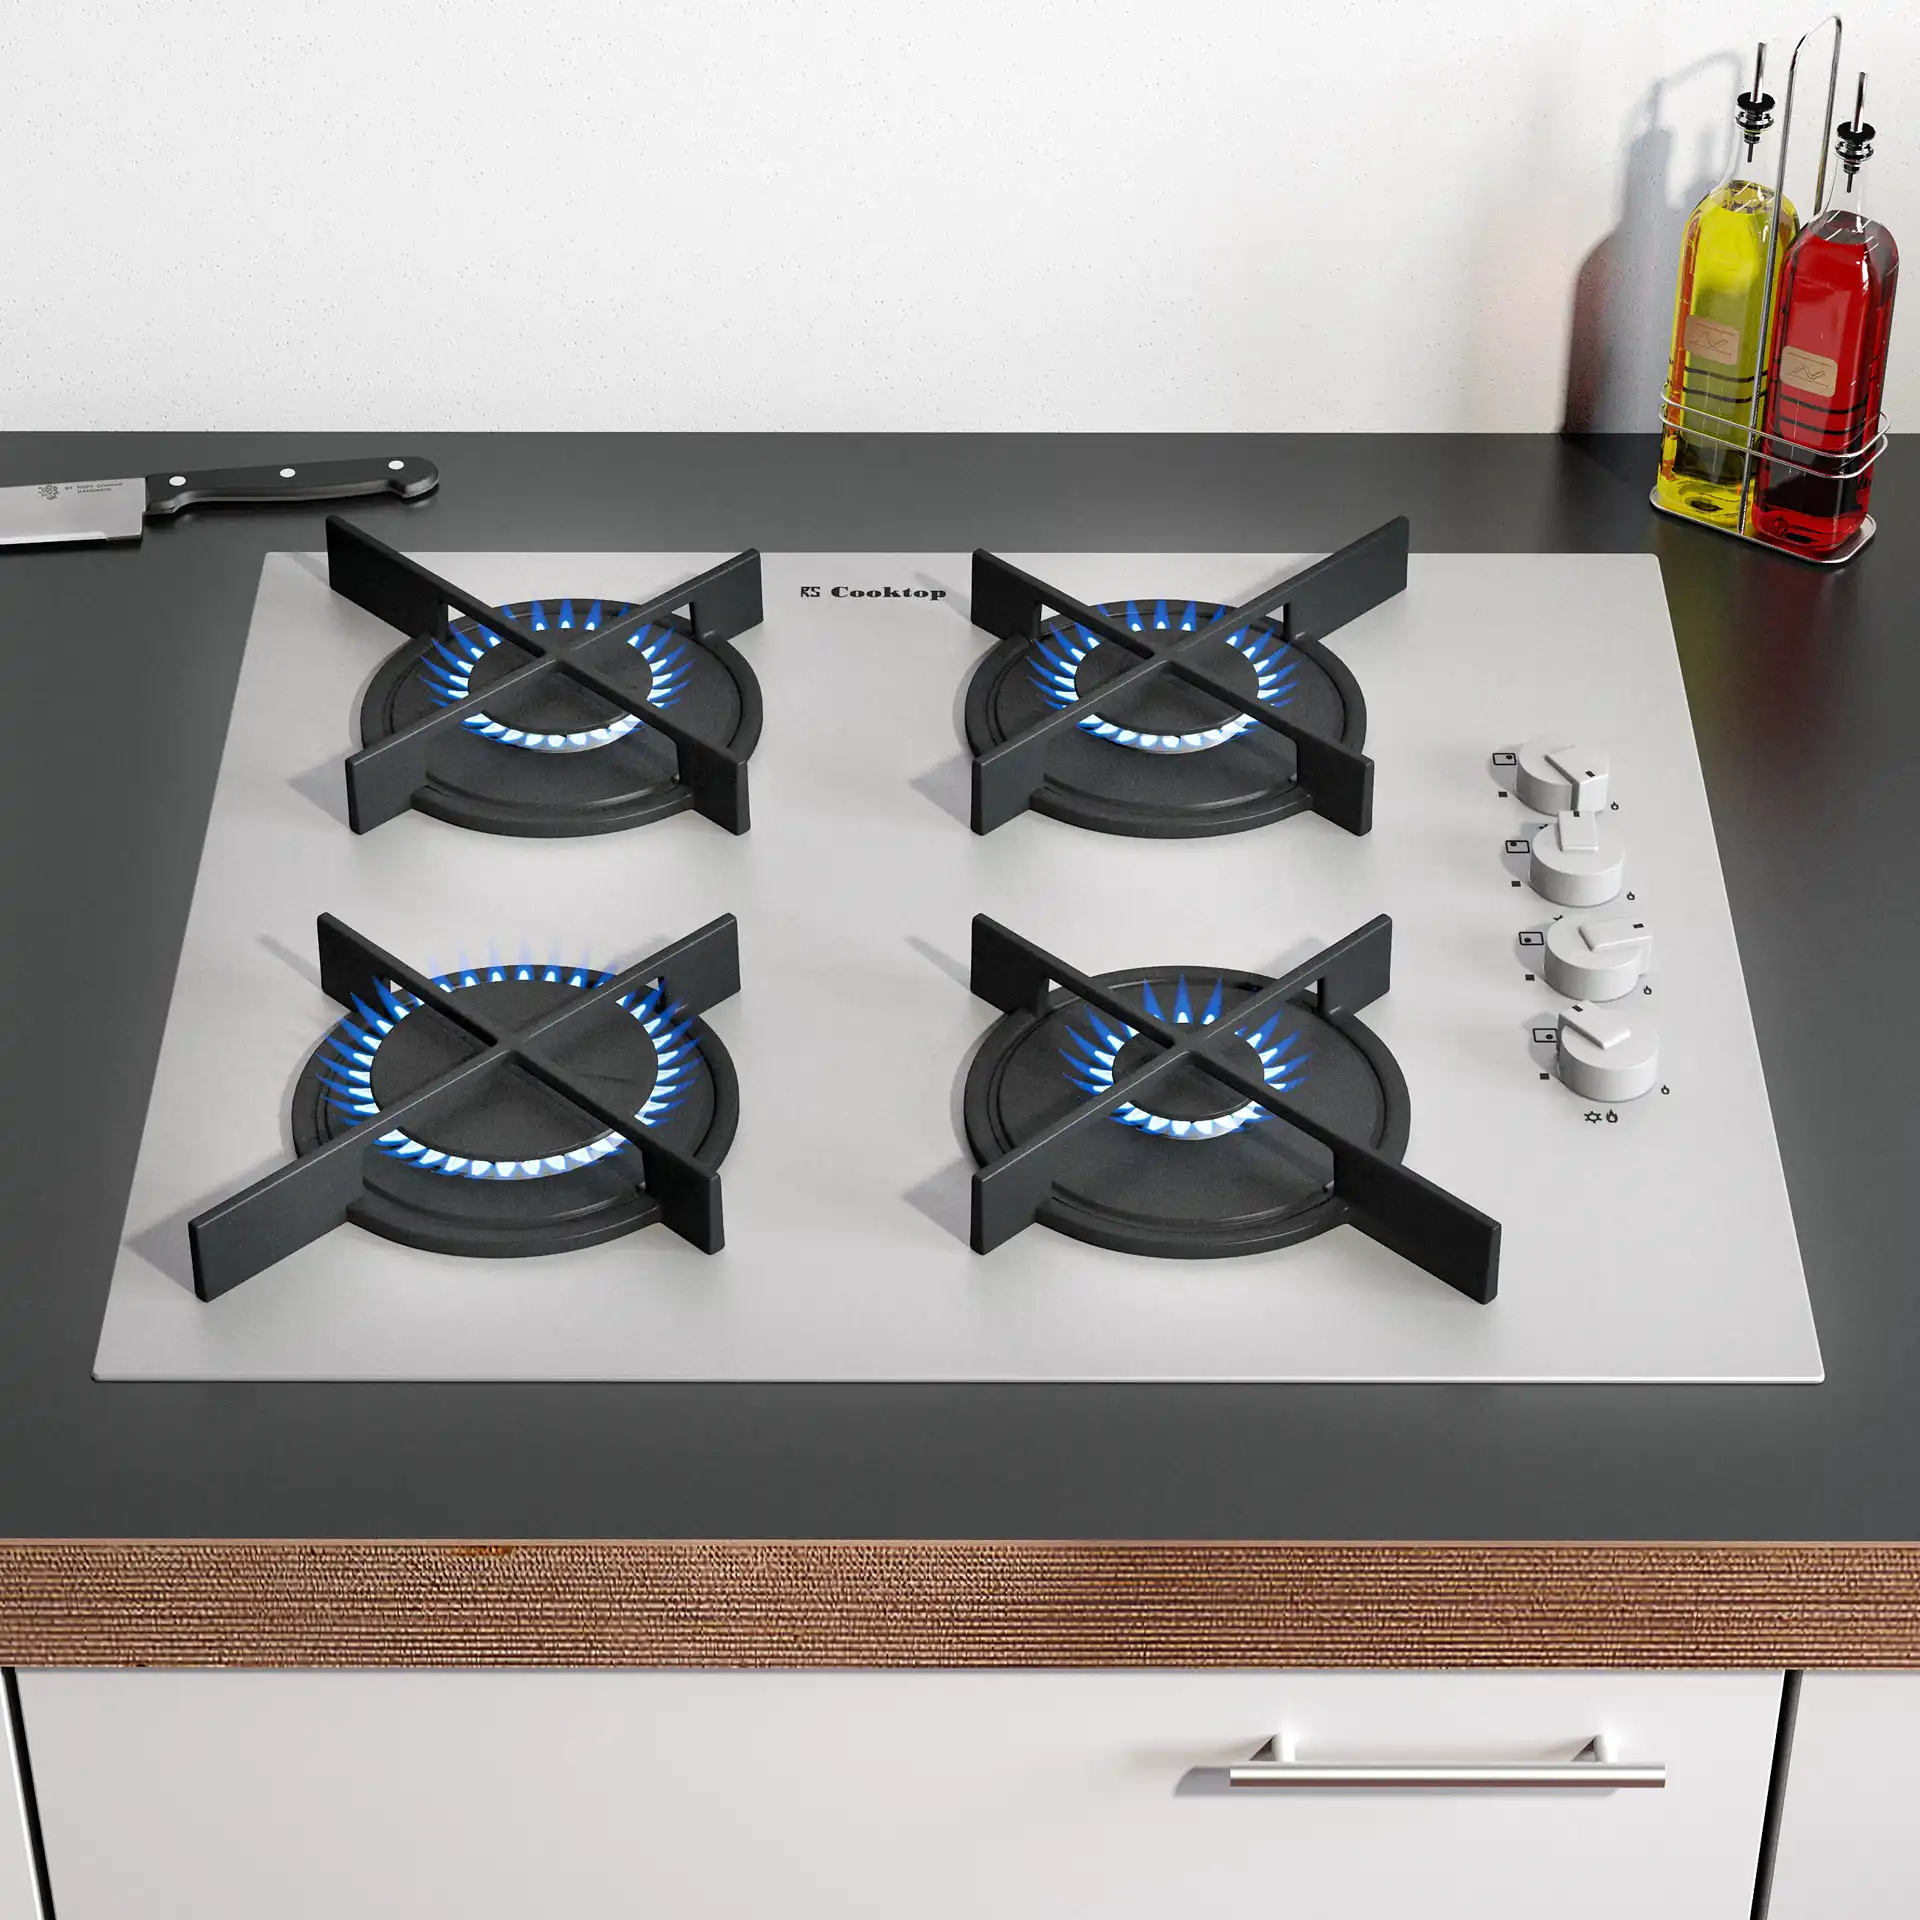 Photorealistic rendering of a 3d model of a white gas stove in the interior.